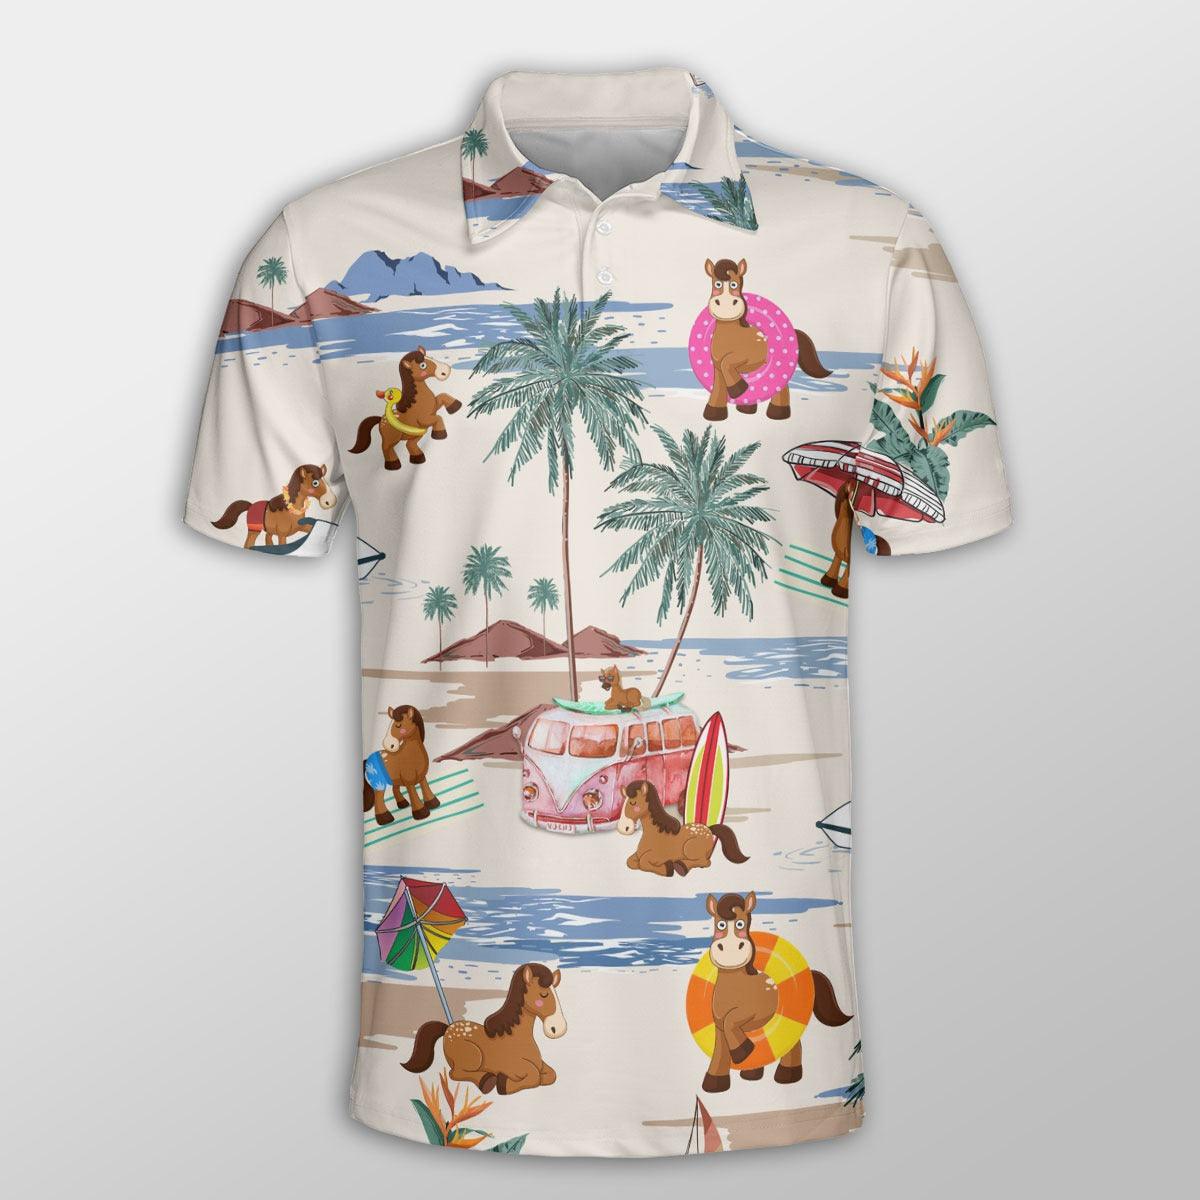 Horse Men Polo Shirts For Summer - Horse Summer Beach Pattern Button Shirts For Men - Perfect Gift For Horse Lovers, Cattle Lovers - Amzanimalsgift